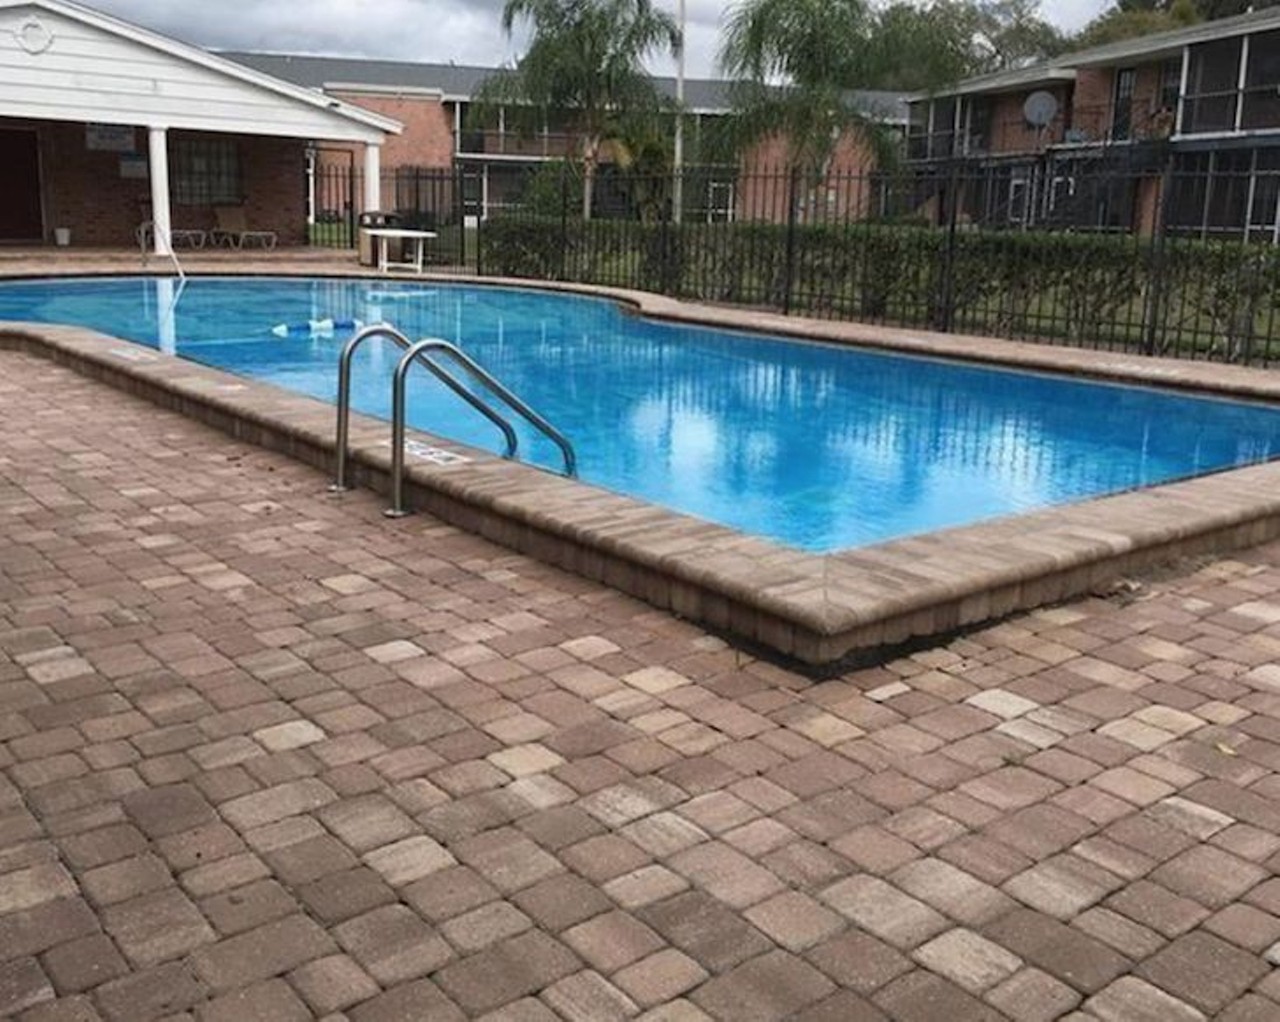 7123 Yacht Basin Ave, Orlando
$1,000/mo
2 bed, 2 bath, 1970 sqft
It has a pool and you really can't beat that price, although it is in a rather unsavory part of town full of pawn shops and motels that charge by the hour.